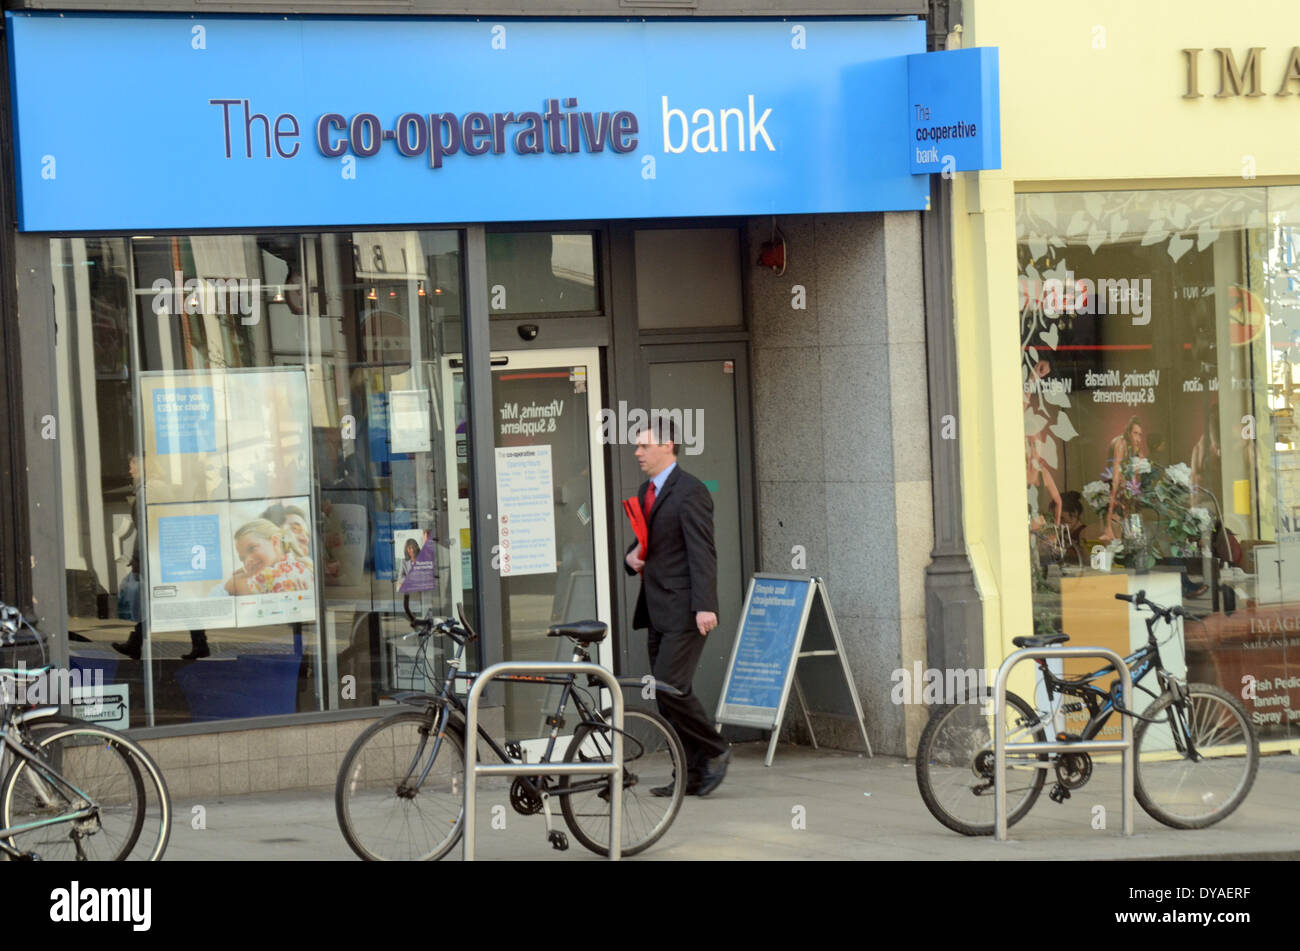 London, 11 April 2014, Co-op bank apologises for £ 1.3 billion loss for 2014 to it's 4.7 million customers after discovery of £1.5 billion pound black hole. Stock Photo